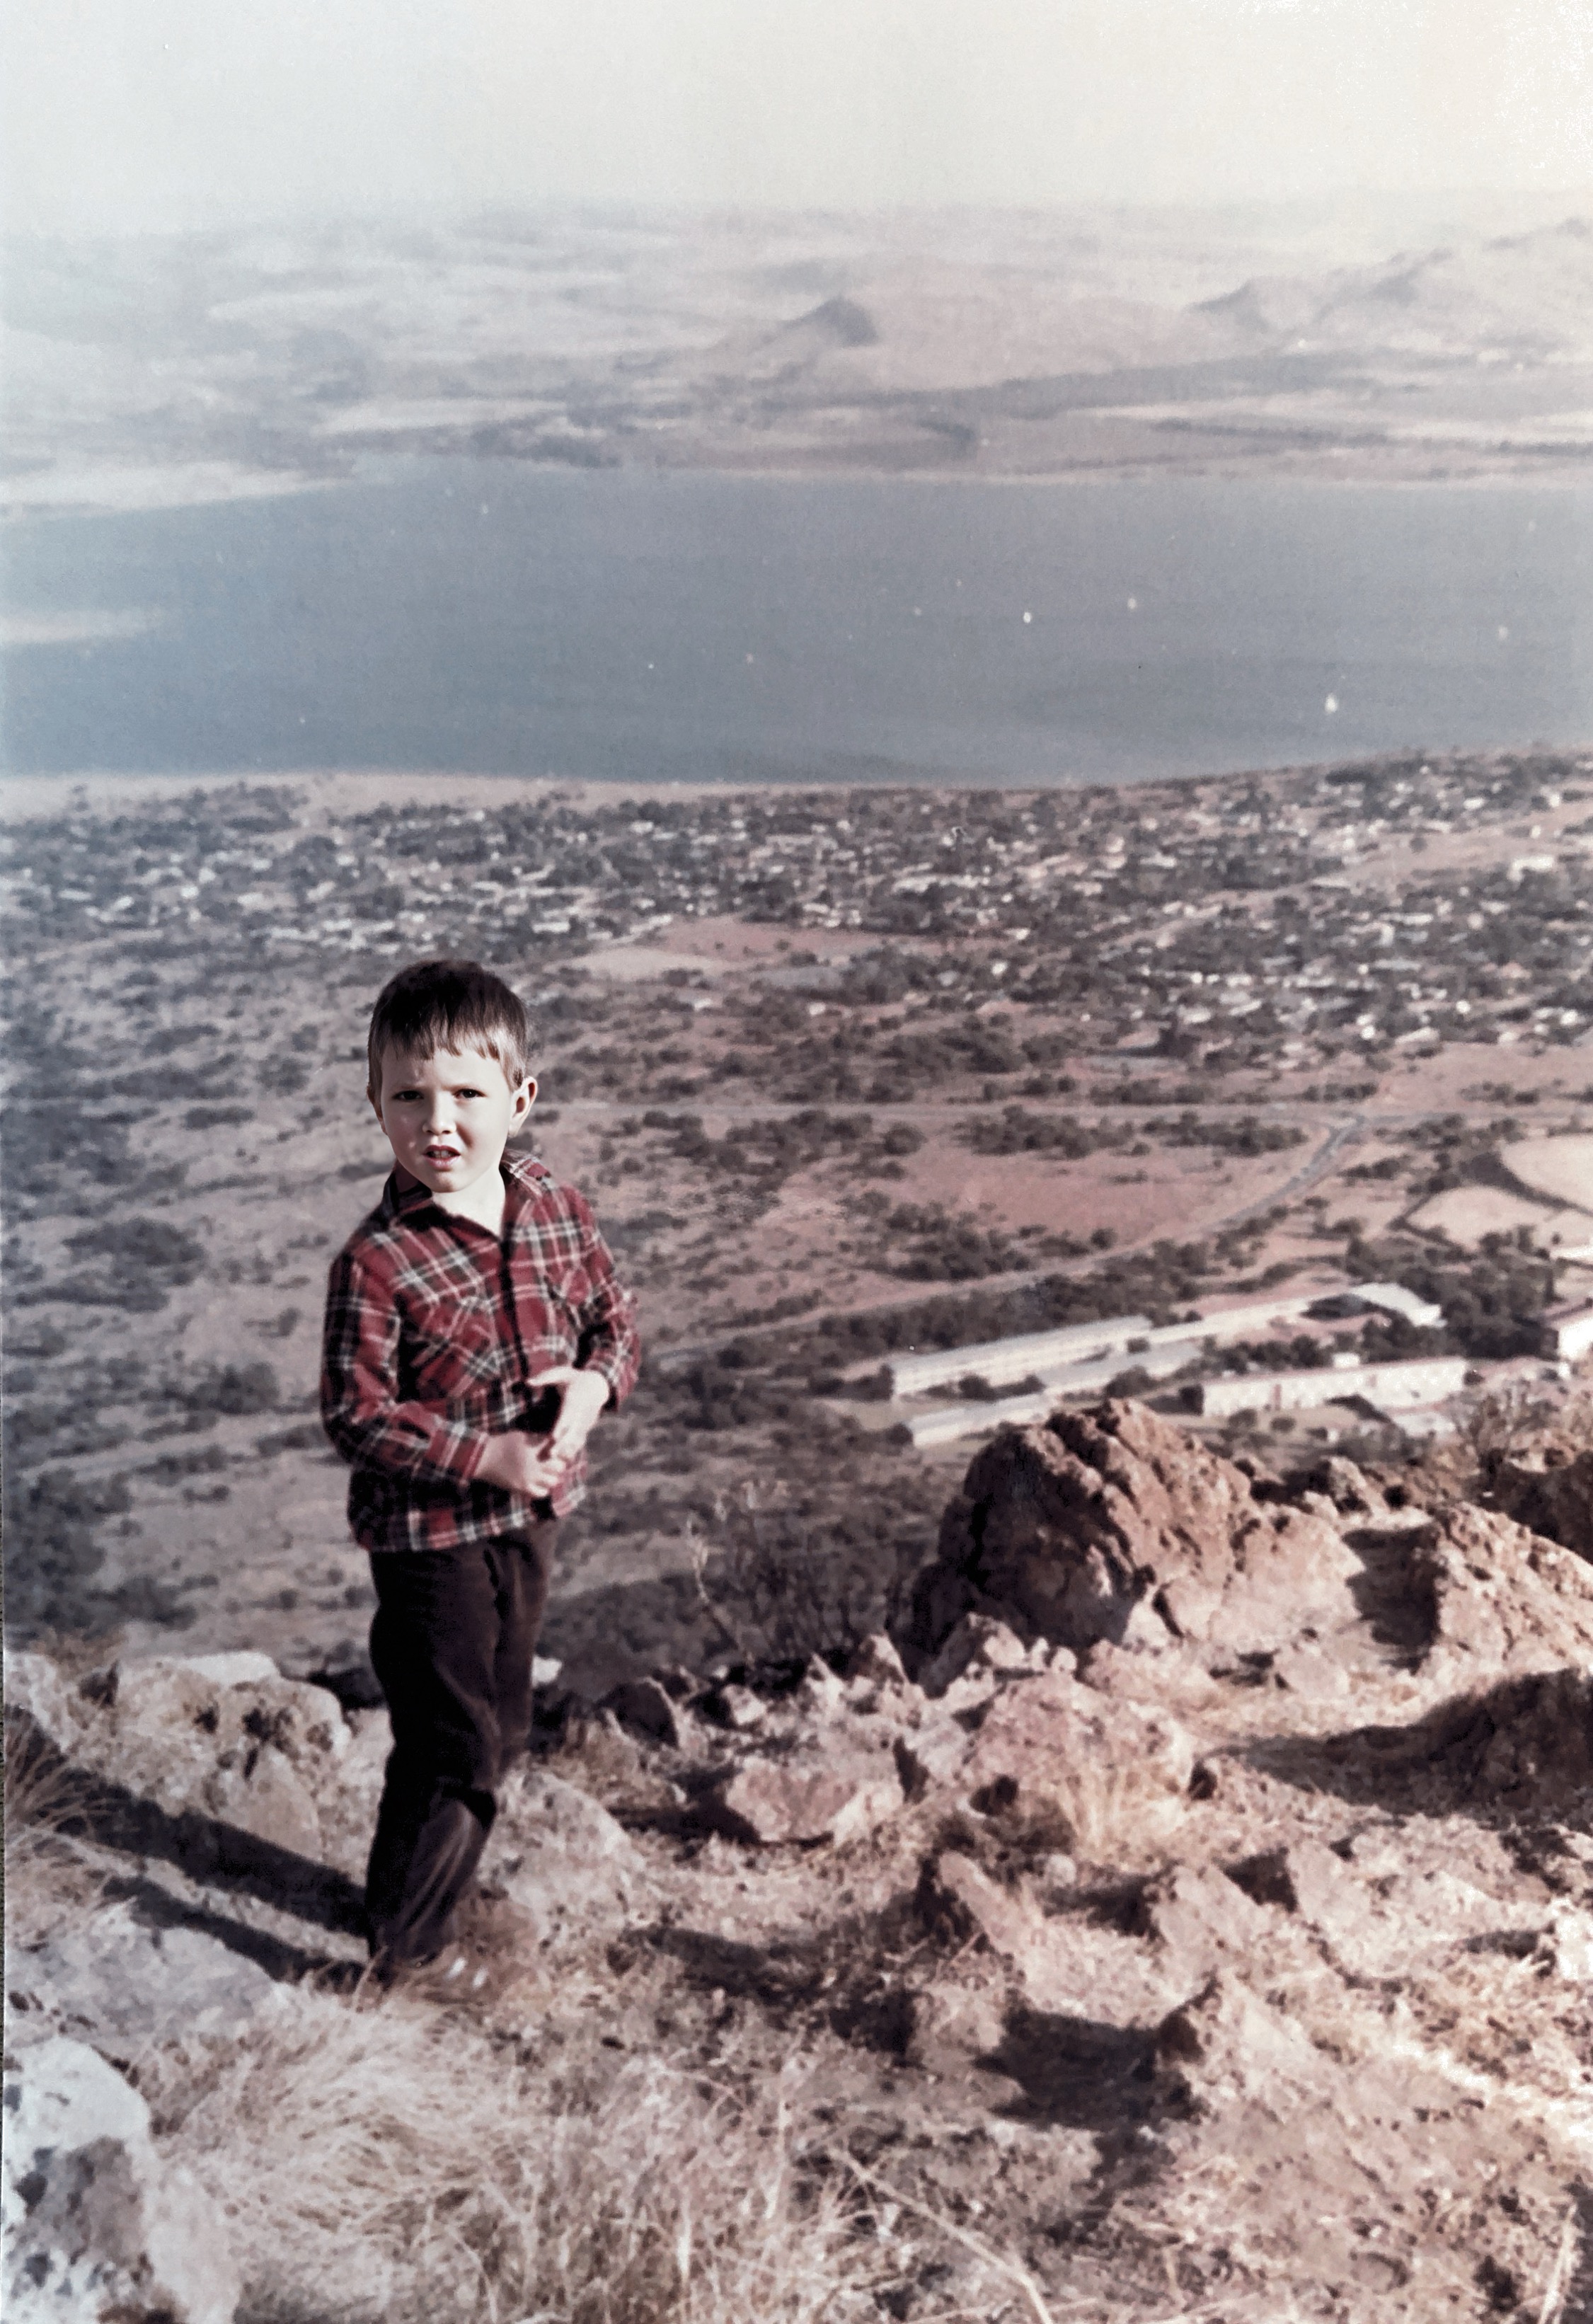 Our son Cobus in 1983 when we moved to Hartbeespoortdam SA. 